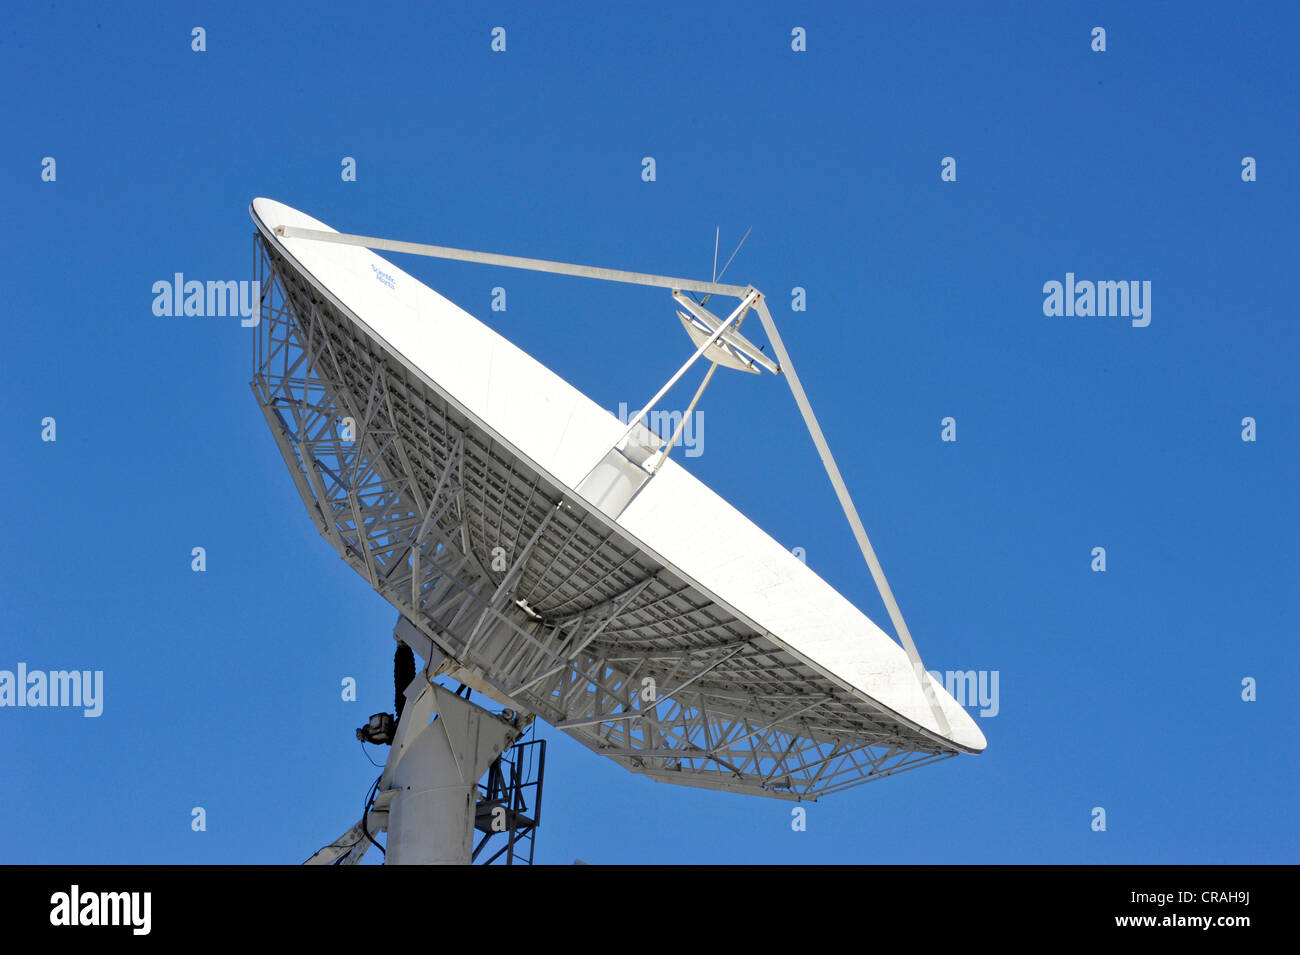 Large satellite dish on the TVNZ building, Auckland, New Zealand, PublicGround Stock Photo